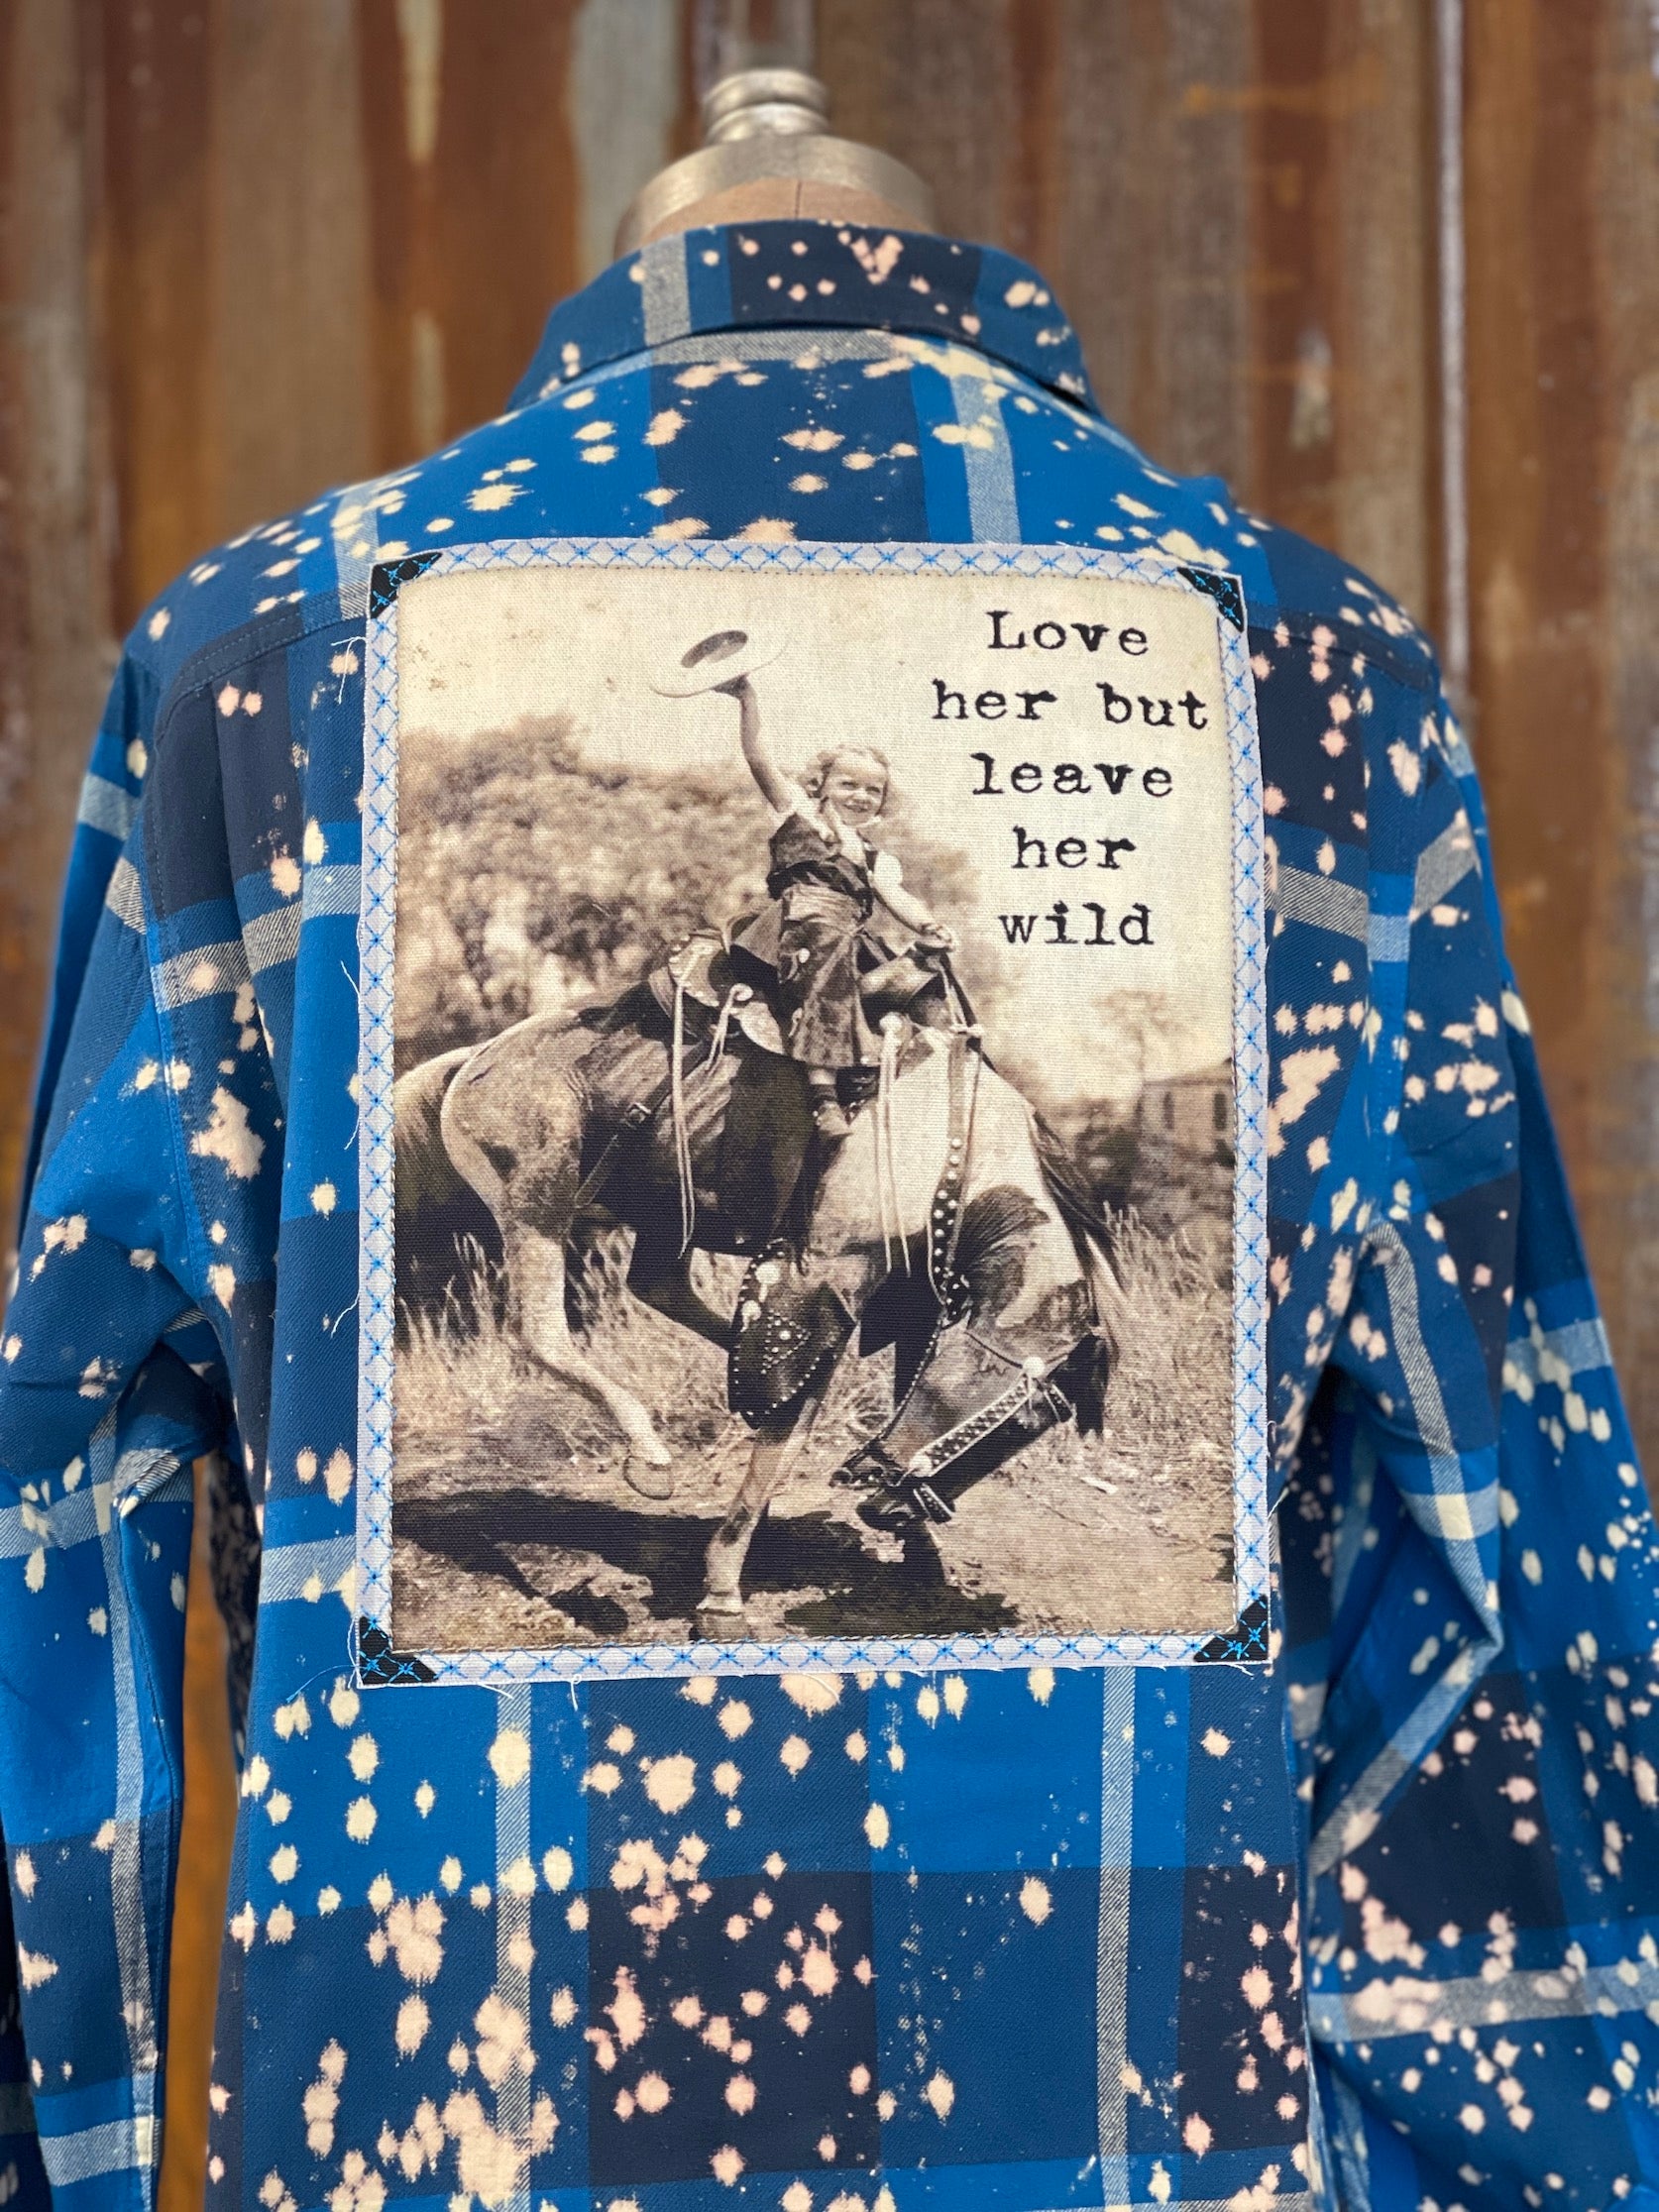 Image of Love Her But Leave Her Wild Art Flannel- Distressed River  - "l o TN - her but Y 5 leave R % her 